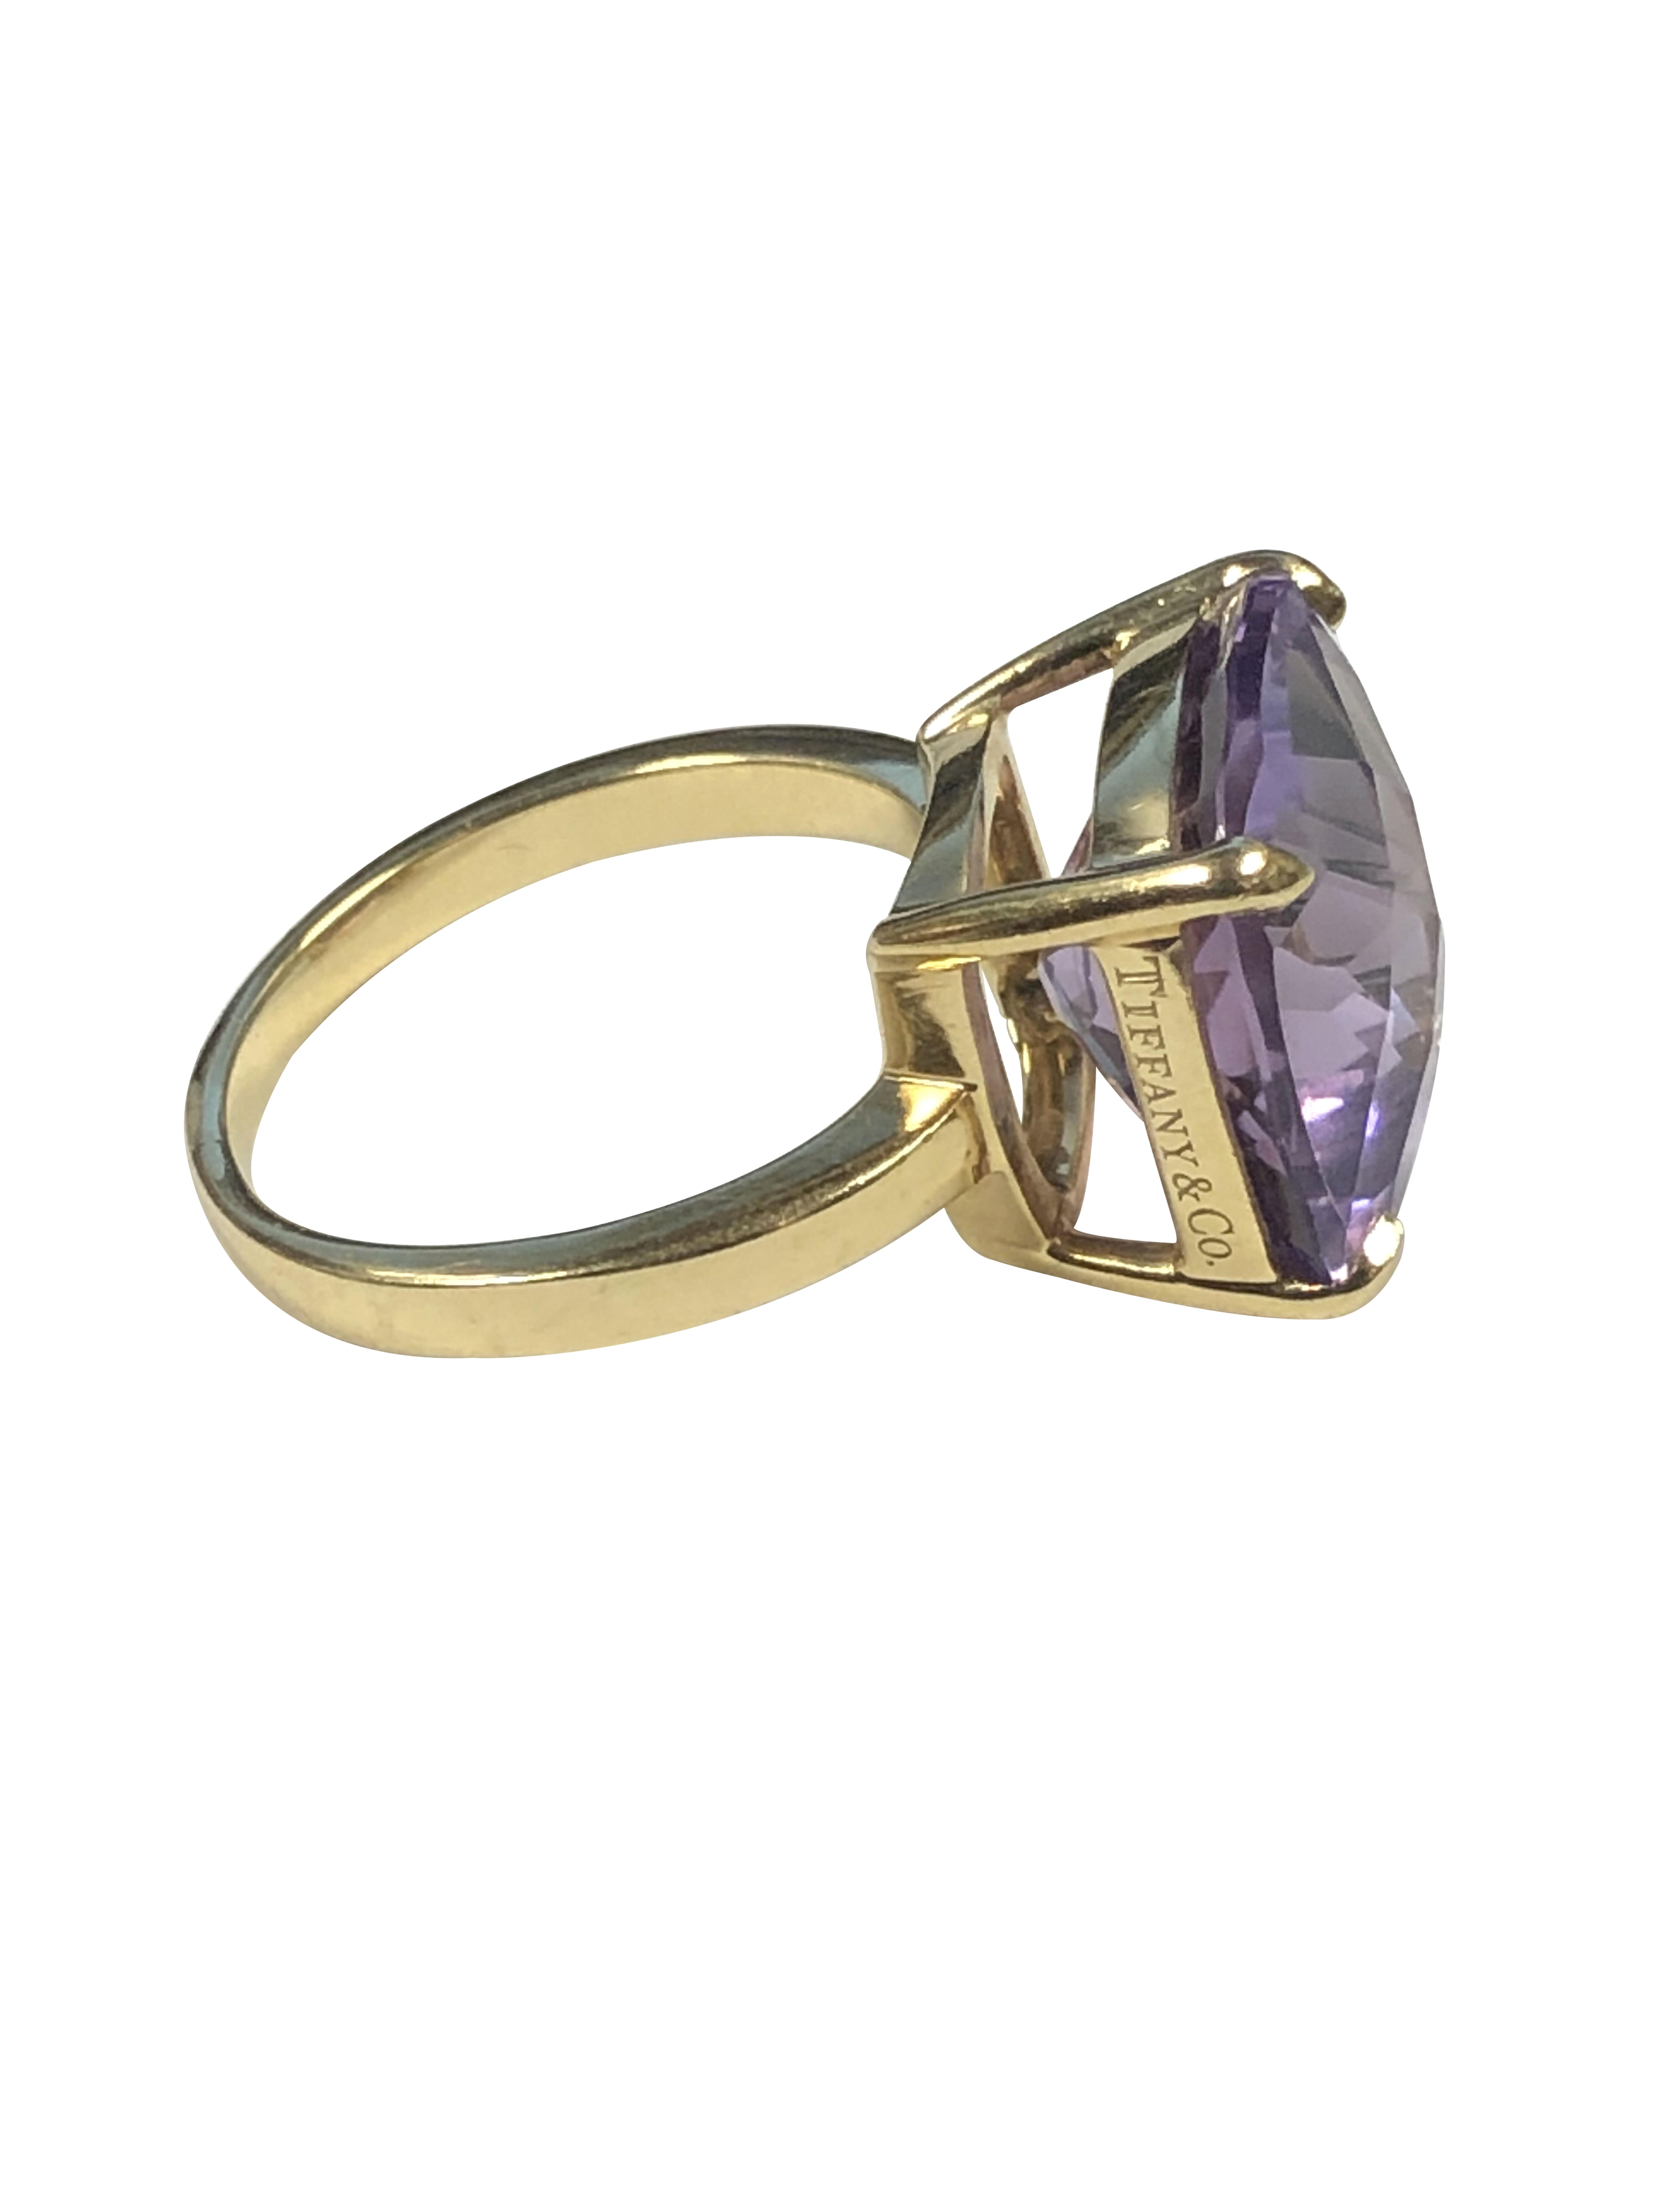 Circa 2015 Tiffany & Company Sugar Stacks collection 18K Yellow Gold Ring, set with a Cushion shape cross cut Amethyst measuring 14 X 14 M.M. approximately 6 carats. Finger size 7, comes in original Tiffany presentation box. 